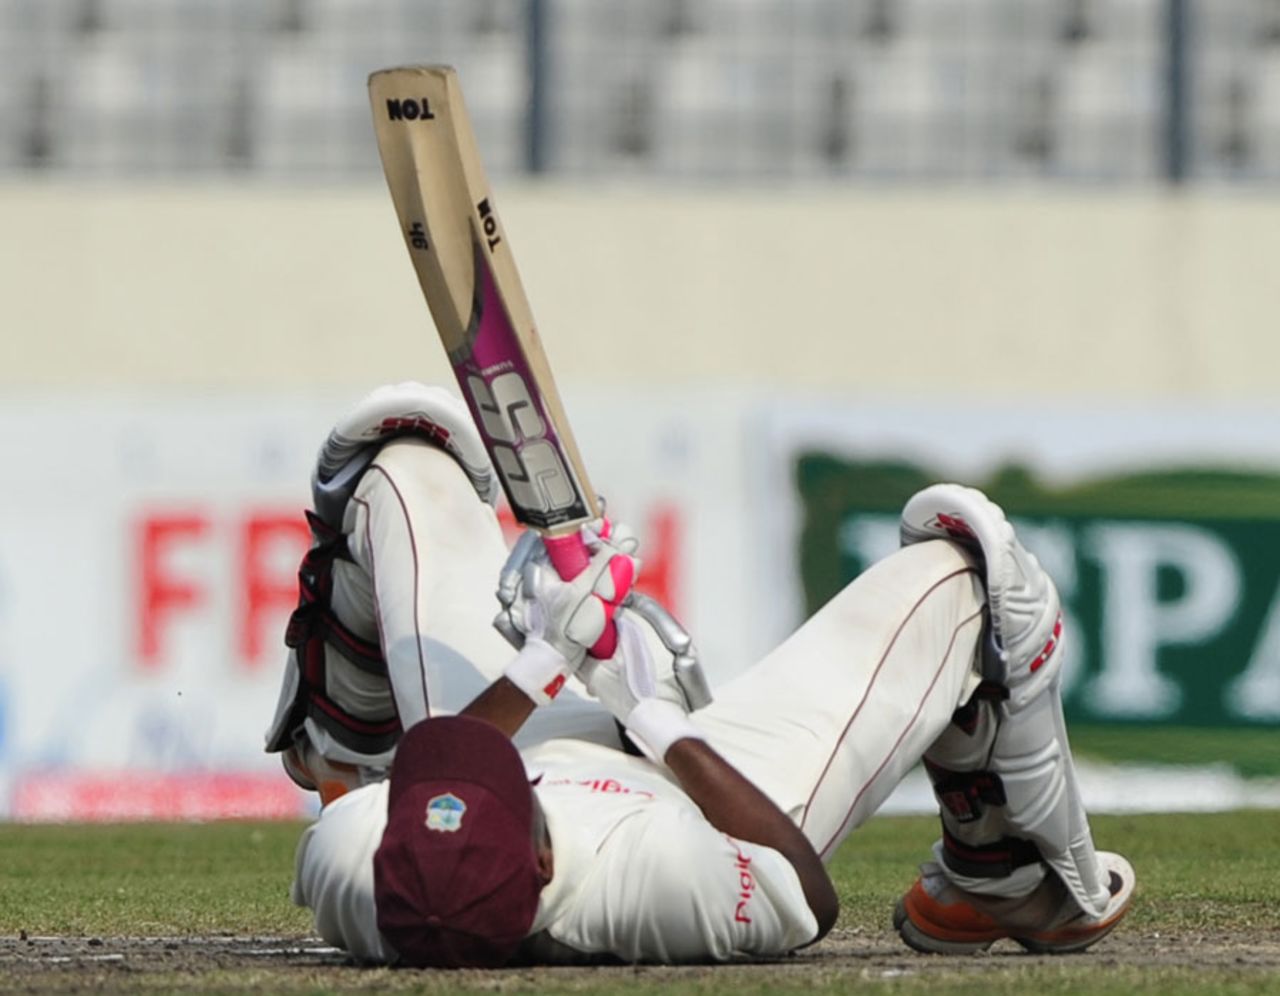 Darren Bravo reacts after falling five runs short of a double-century, Bangladesh v West Indies, 2nd Test, Mirpur, 4th day, November 1, 2011